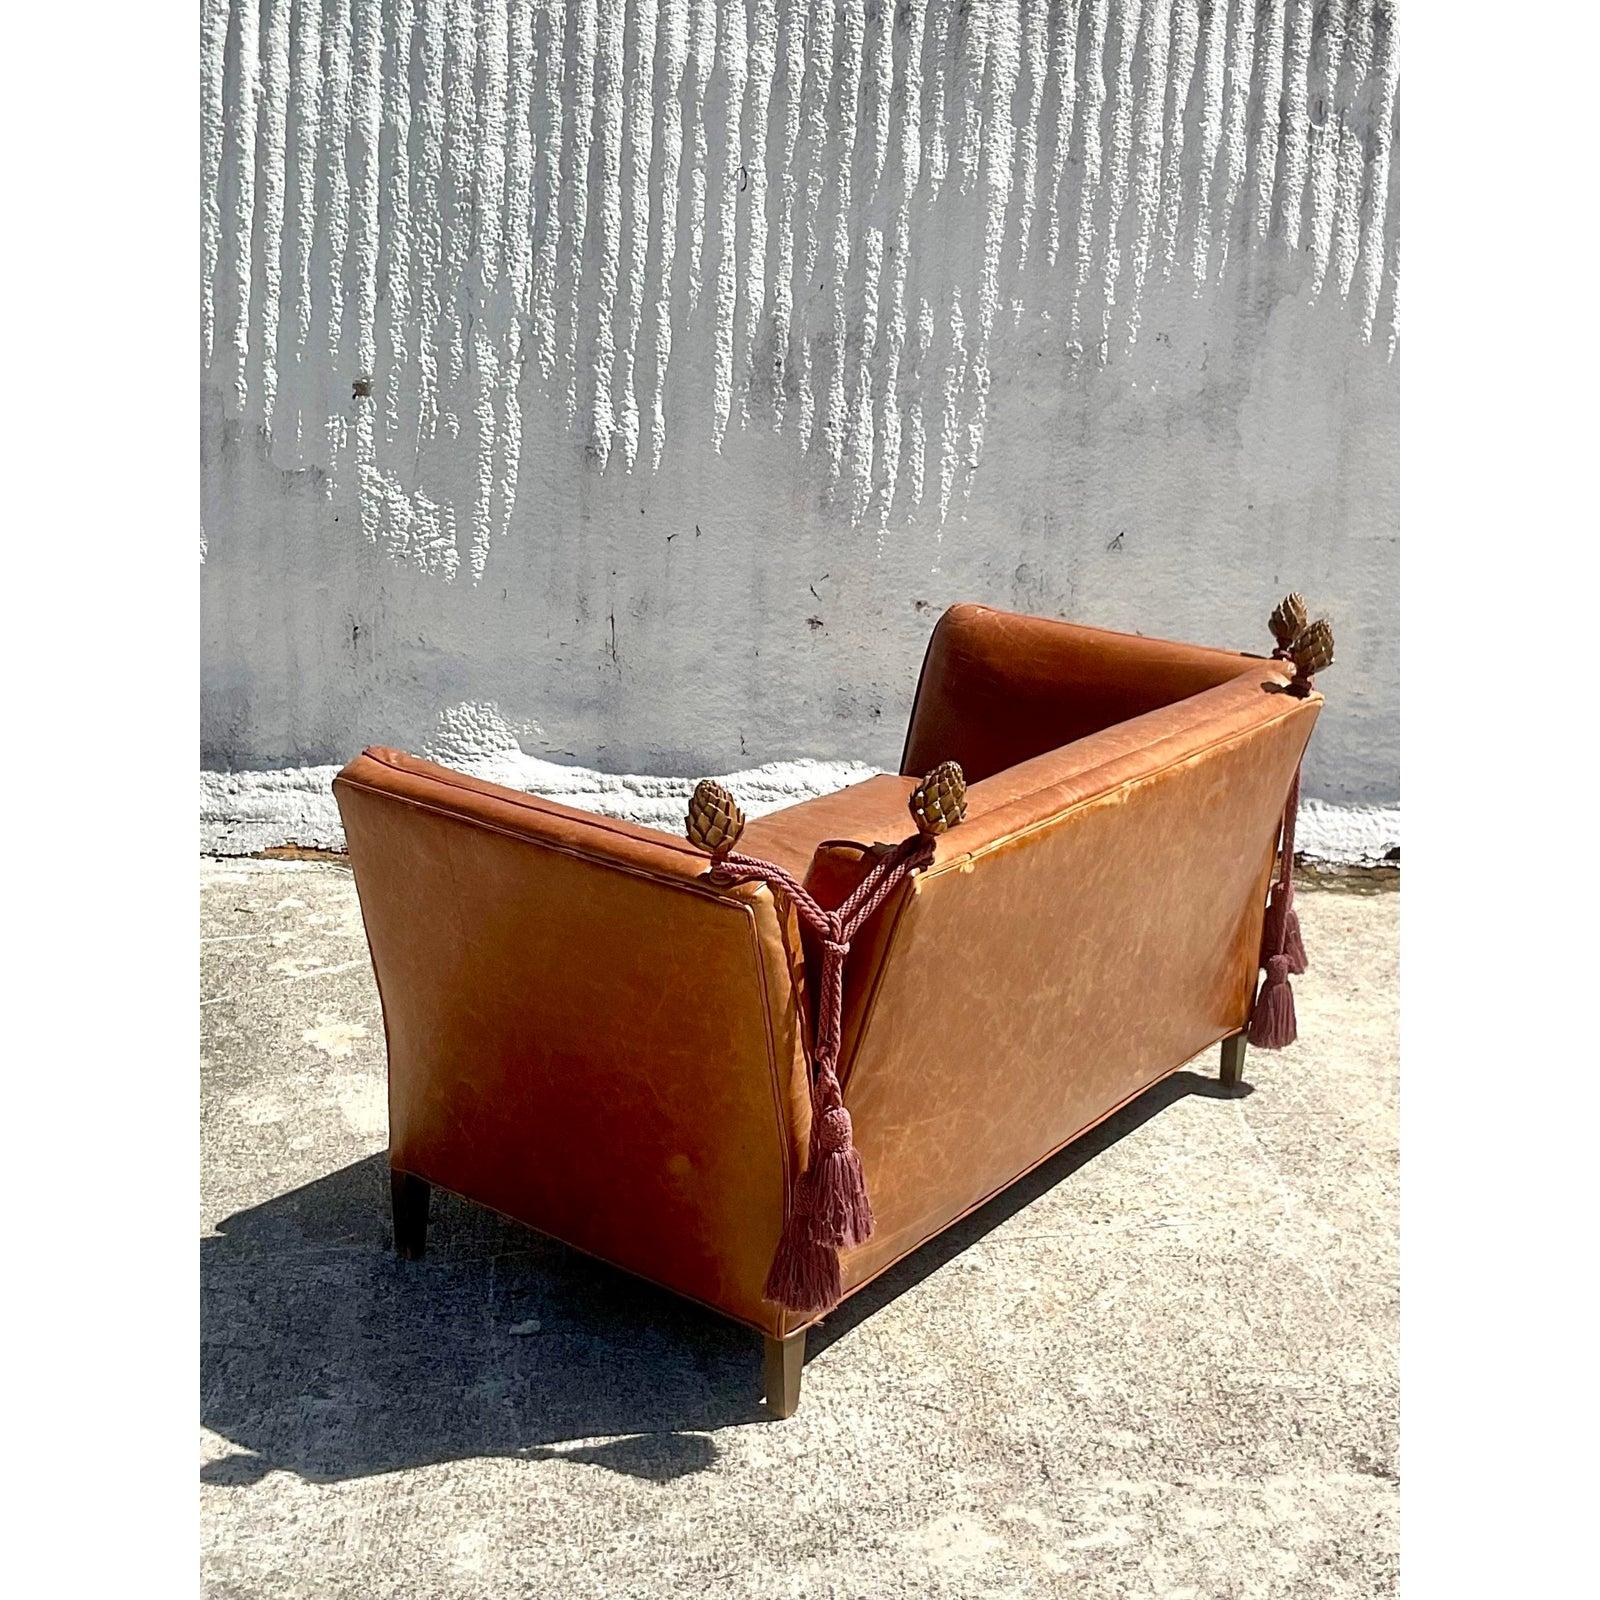 Incredible vintage Baker Knole loveseat. Beautiful distressed leather in a rich brown color. Carved artichokes adorn the back wrapped in. Swag cord and tassel. Acquired from a Palm Beach estate.